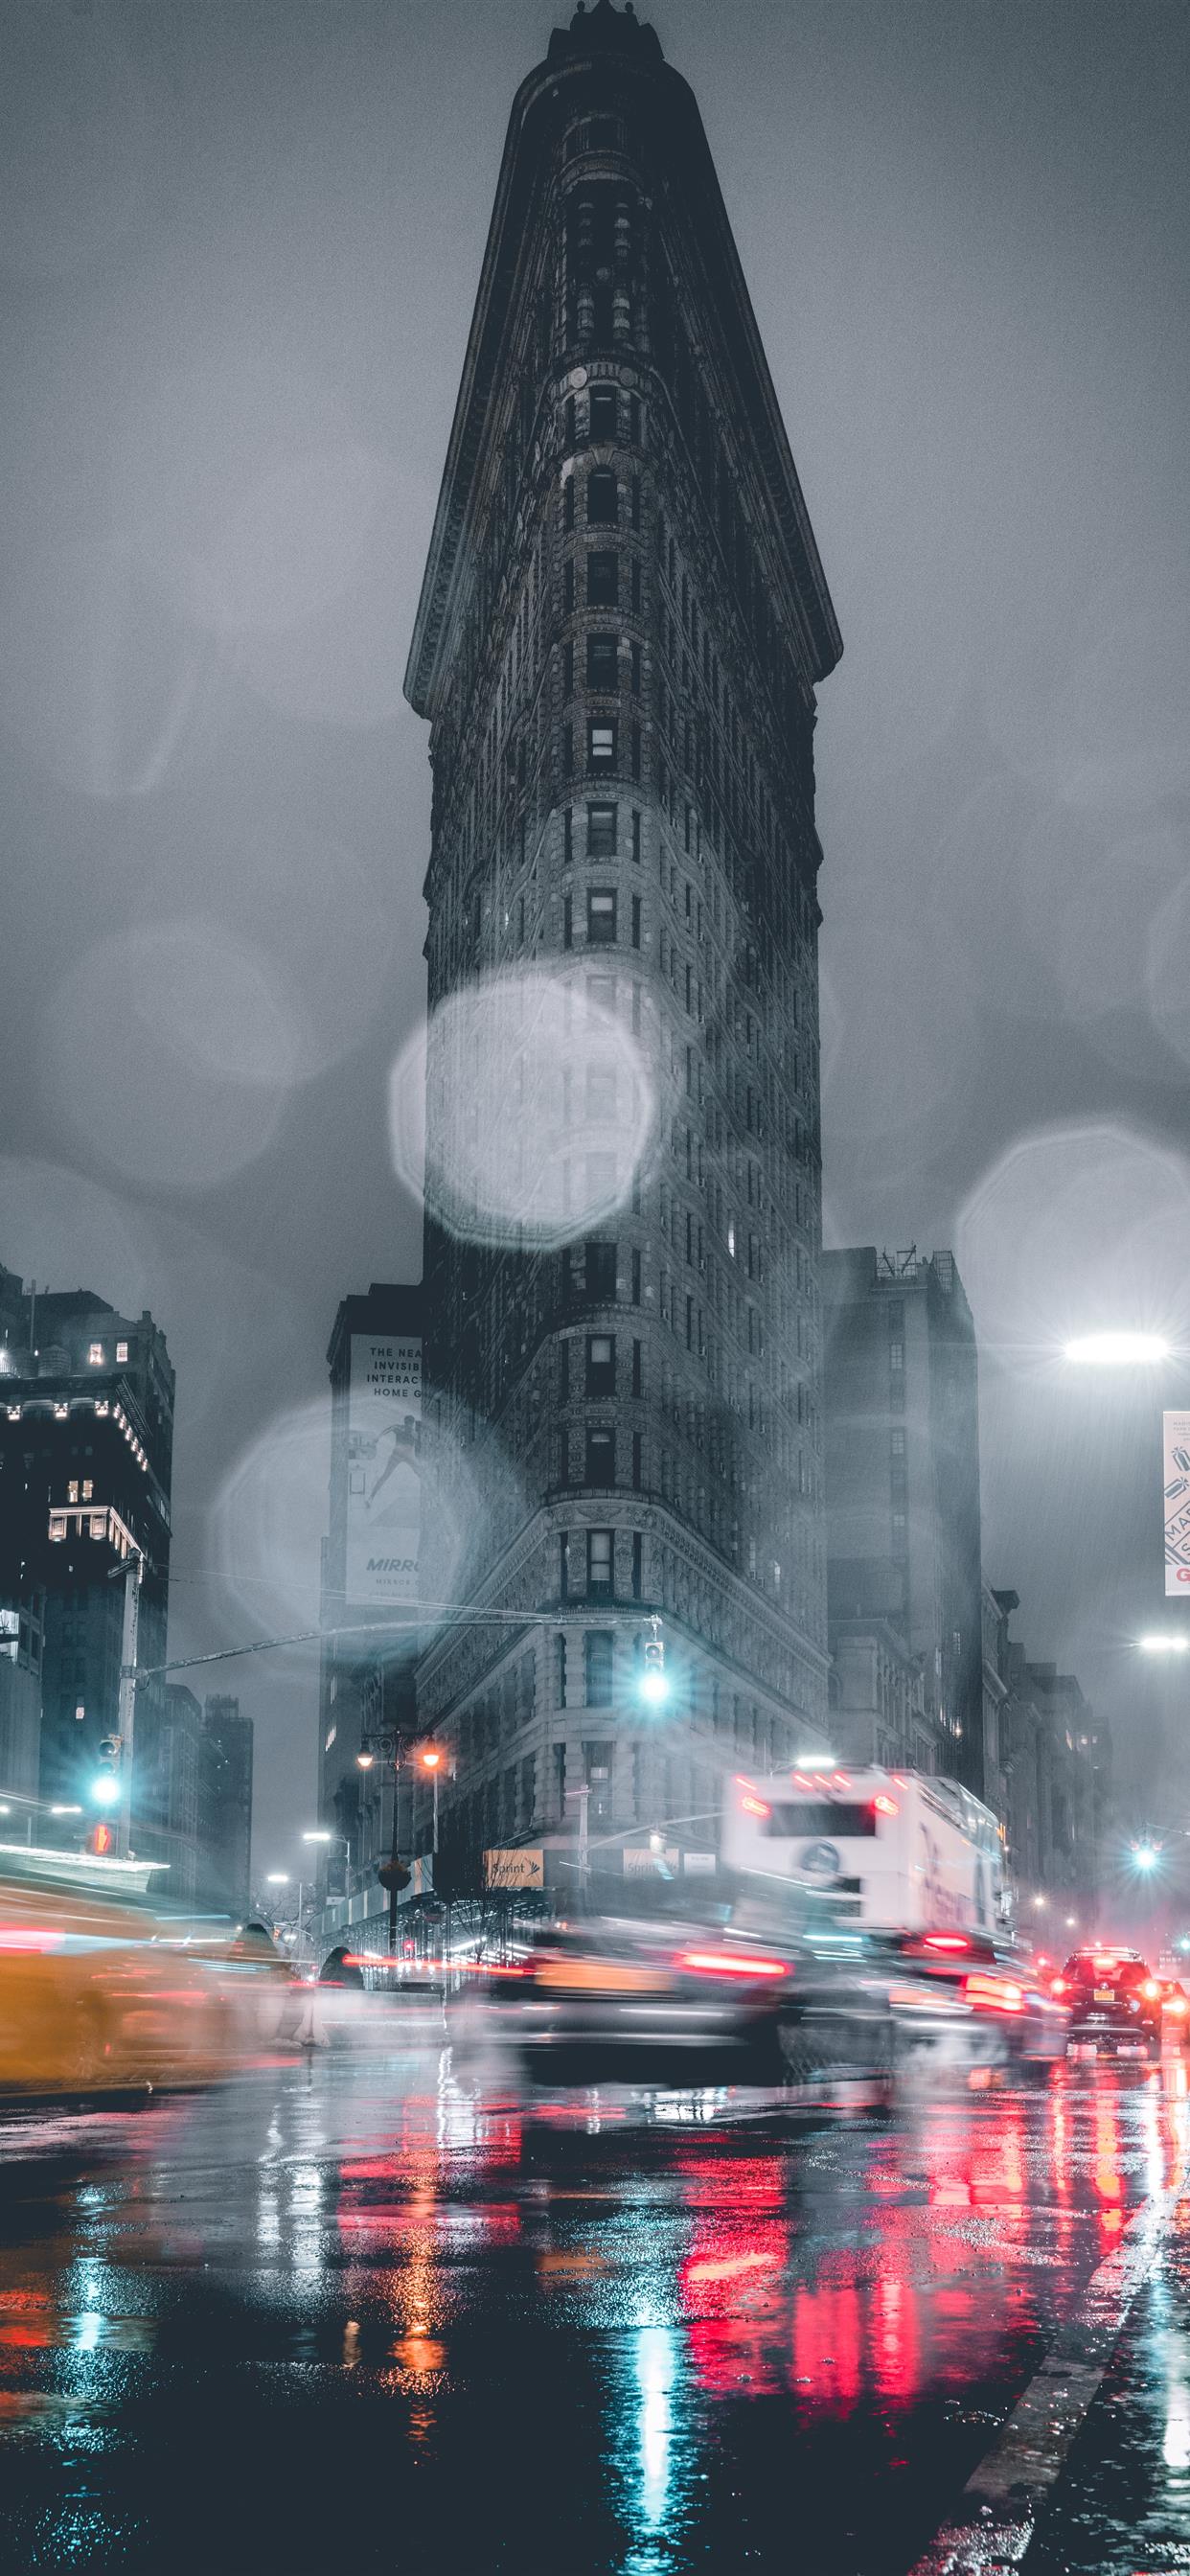 A car and a bus passing by the Flat Iron Building in the rain - Storm